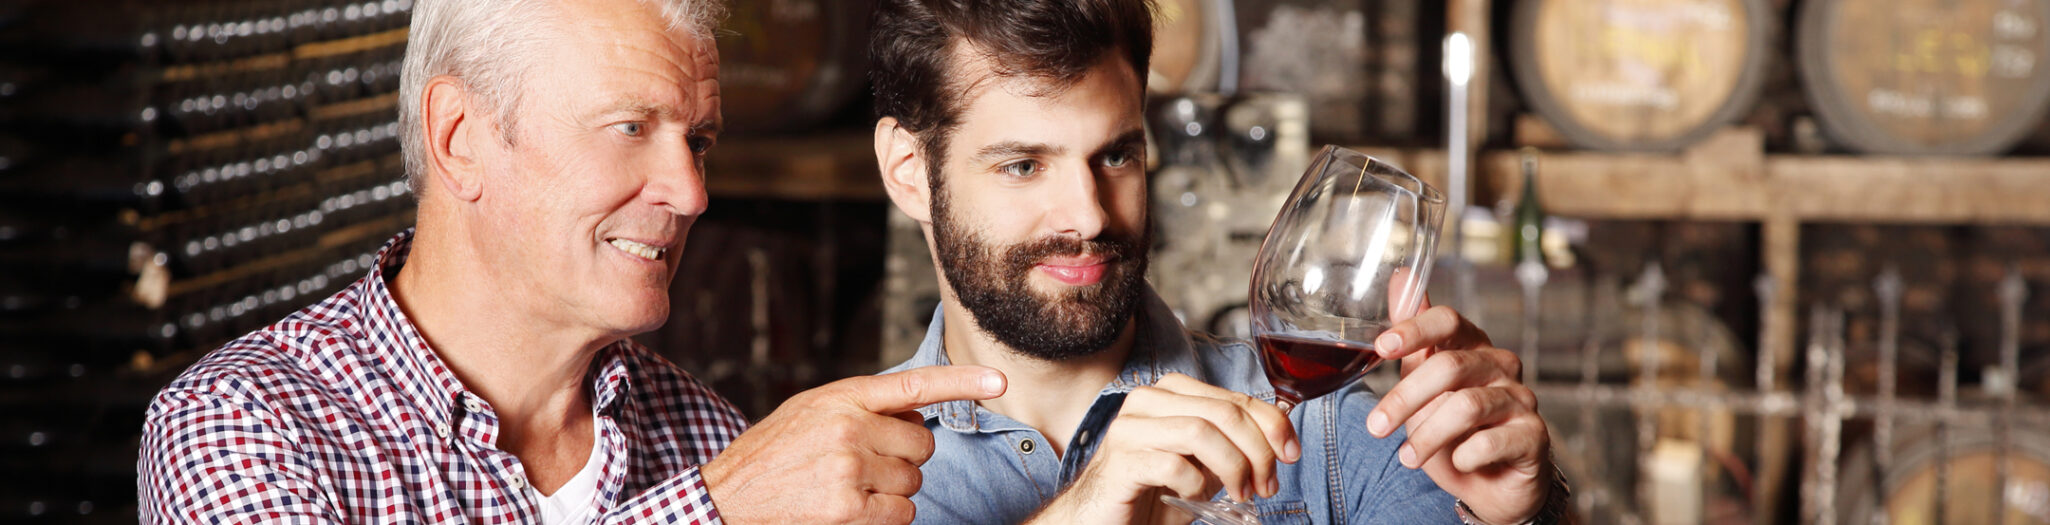 Senior man talking to adult son about wine